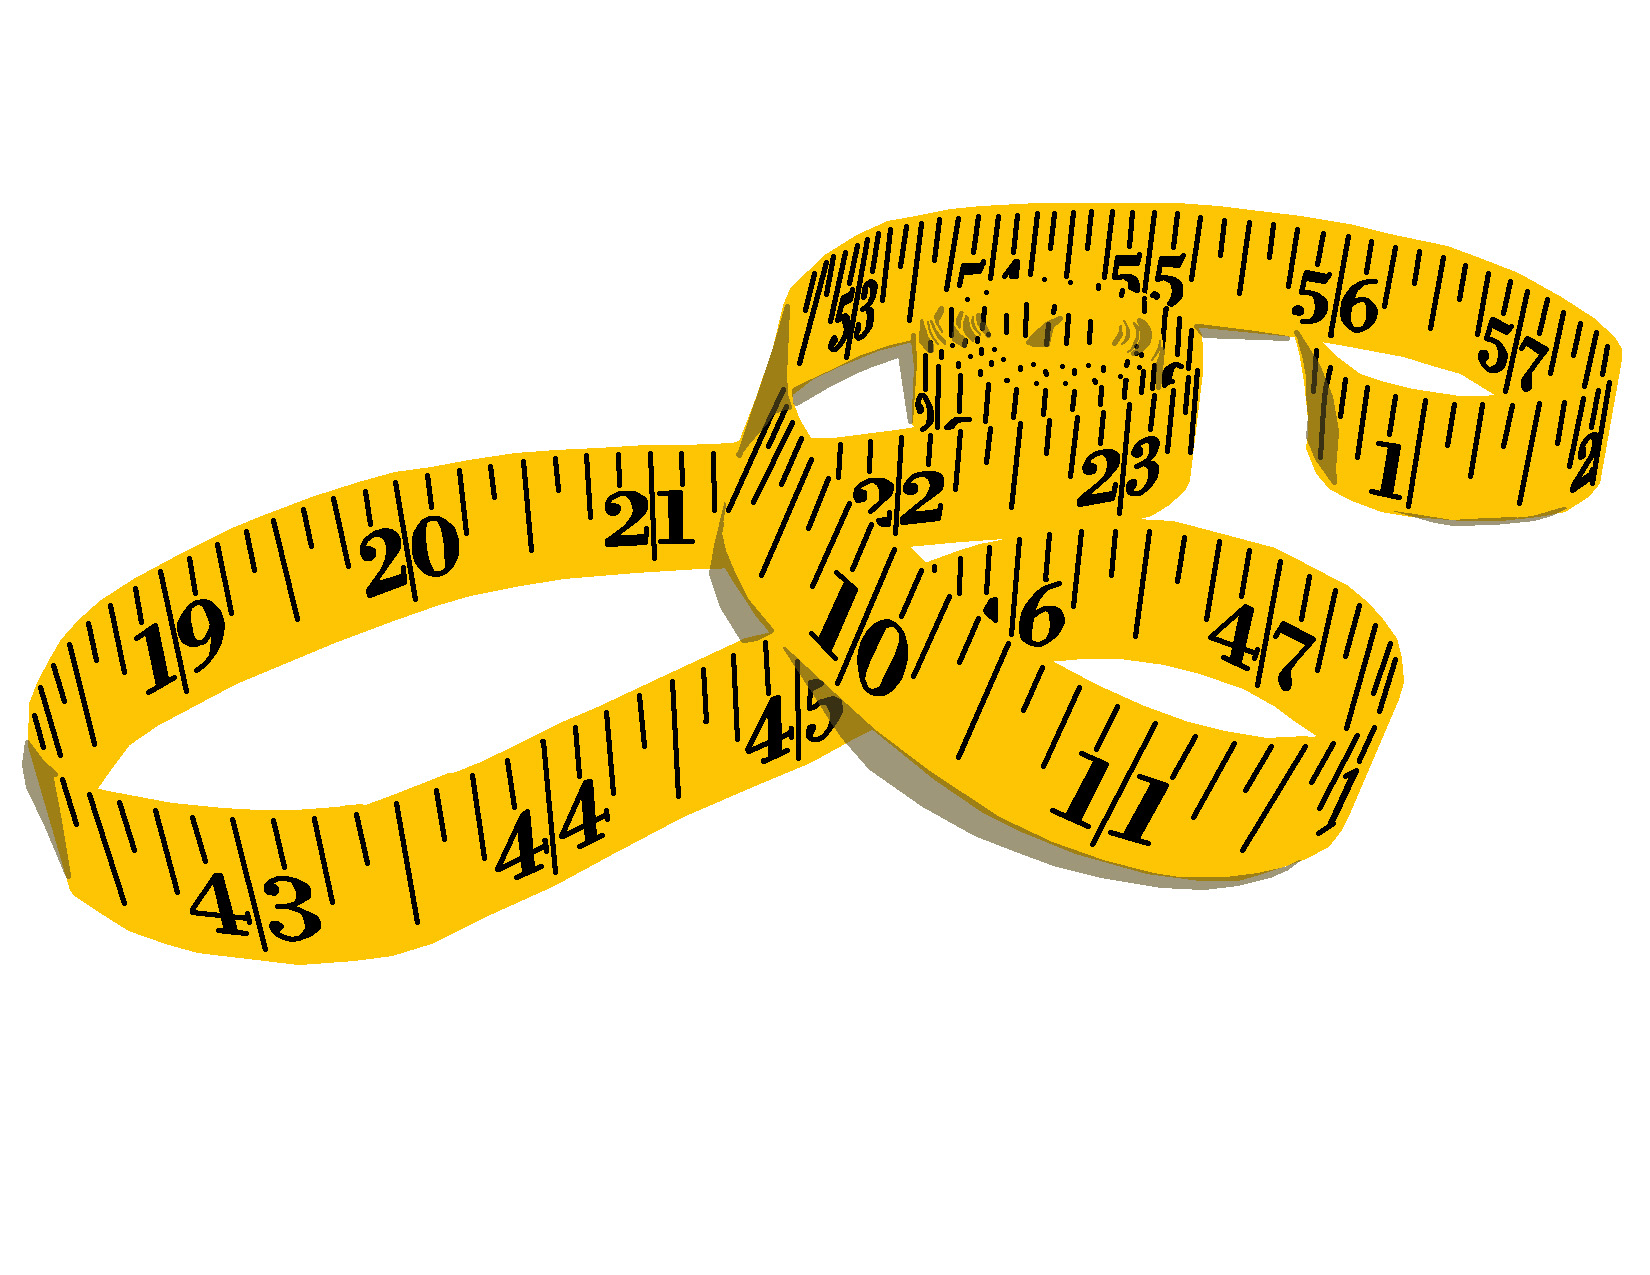 Picture Of A Tape Measure - Cliparts.co